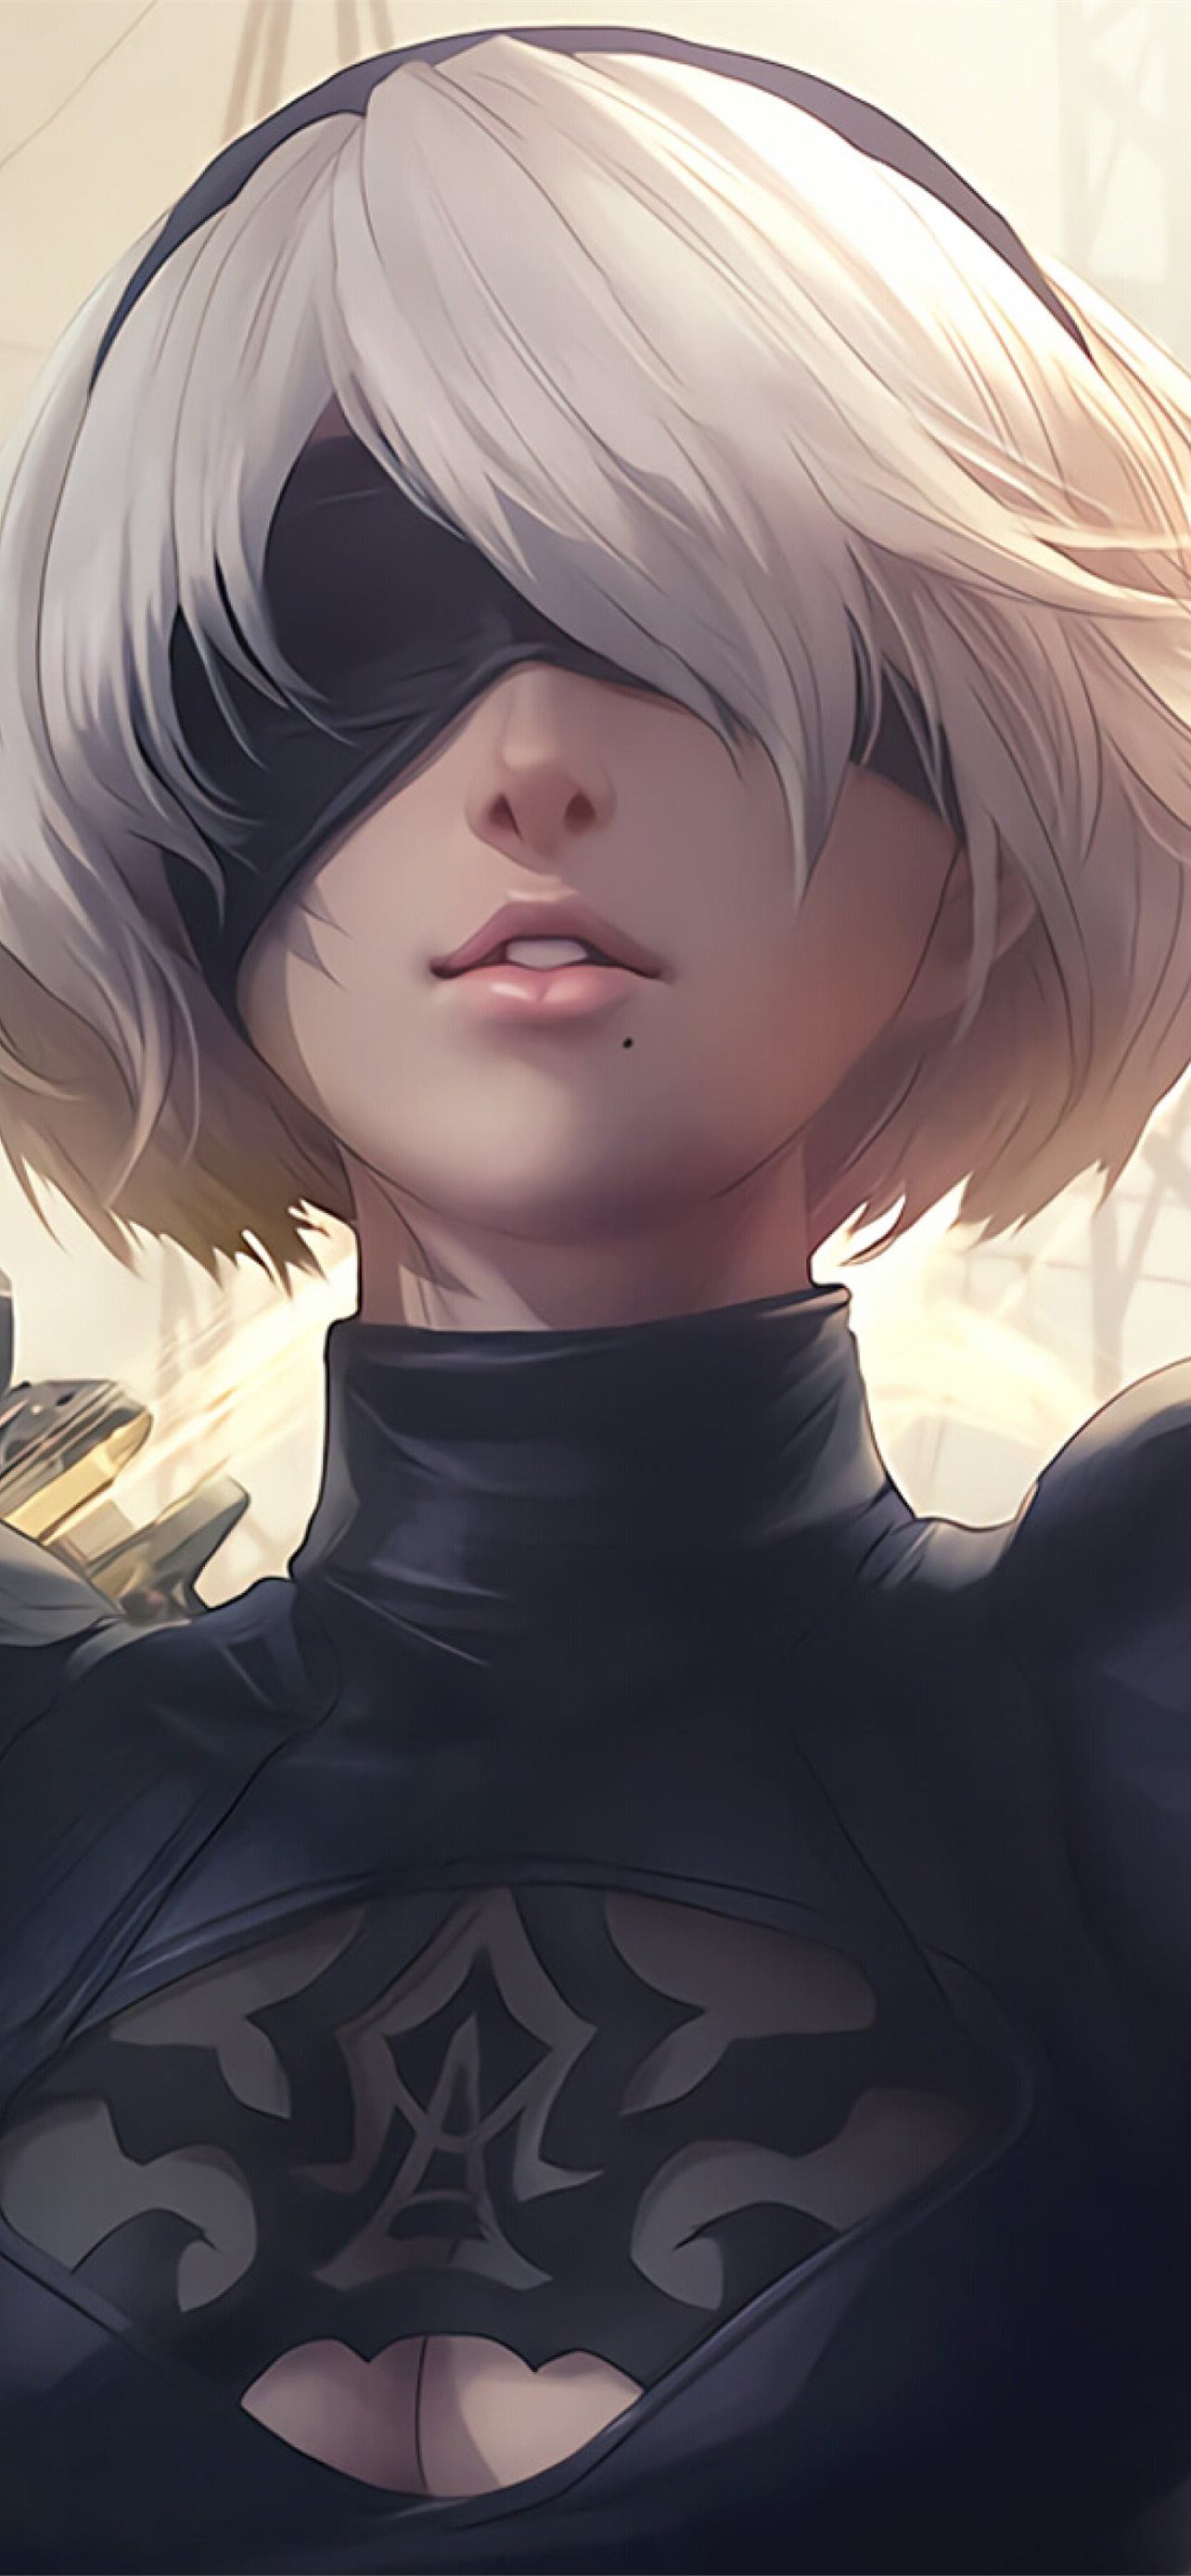 2b Nier Automata Resolution Anime 4K Images Pho iPhone